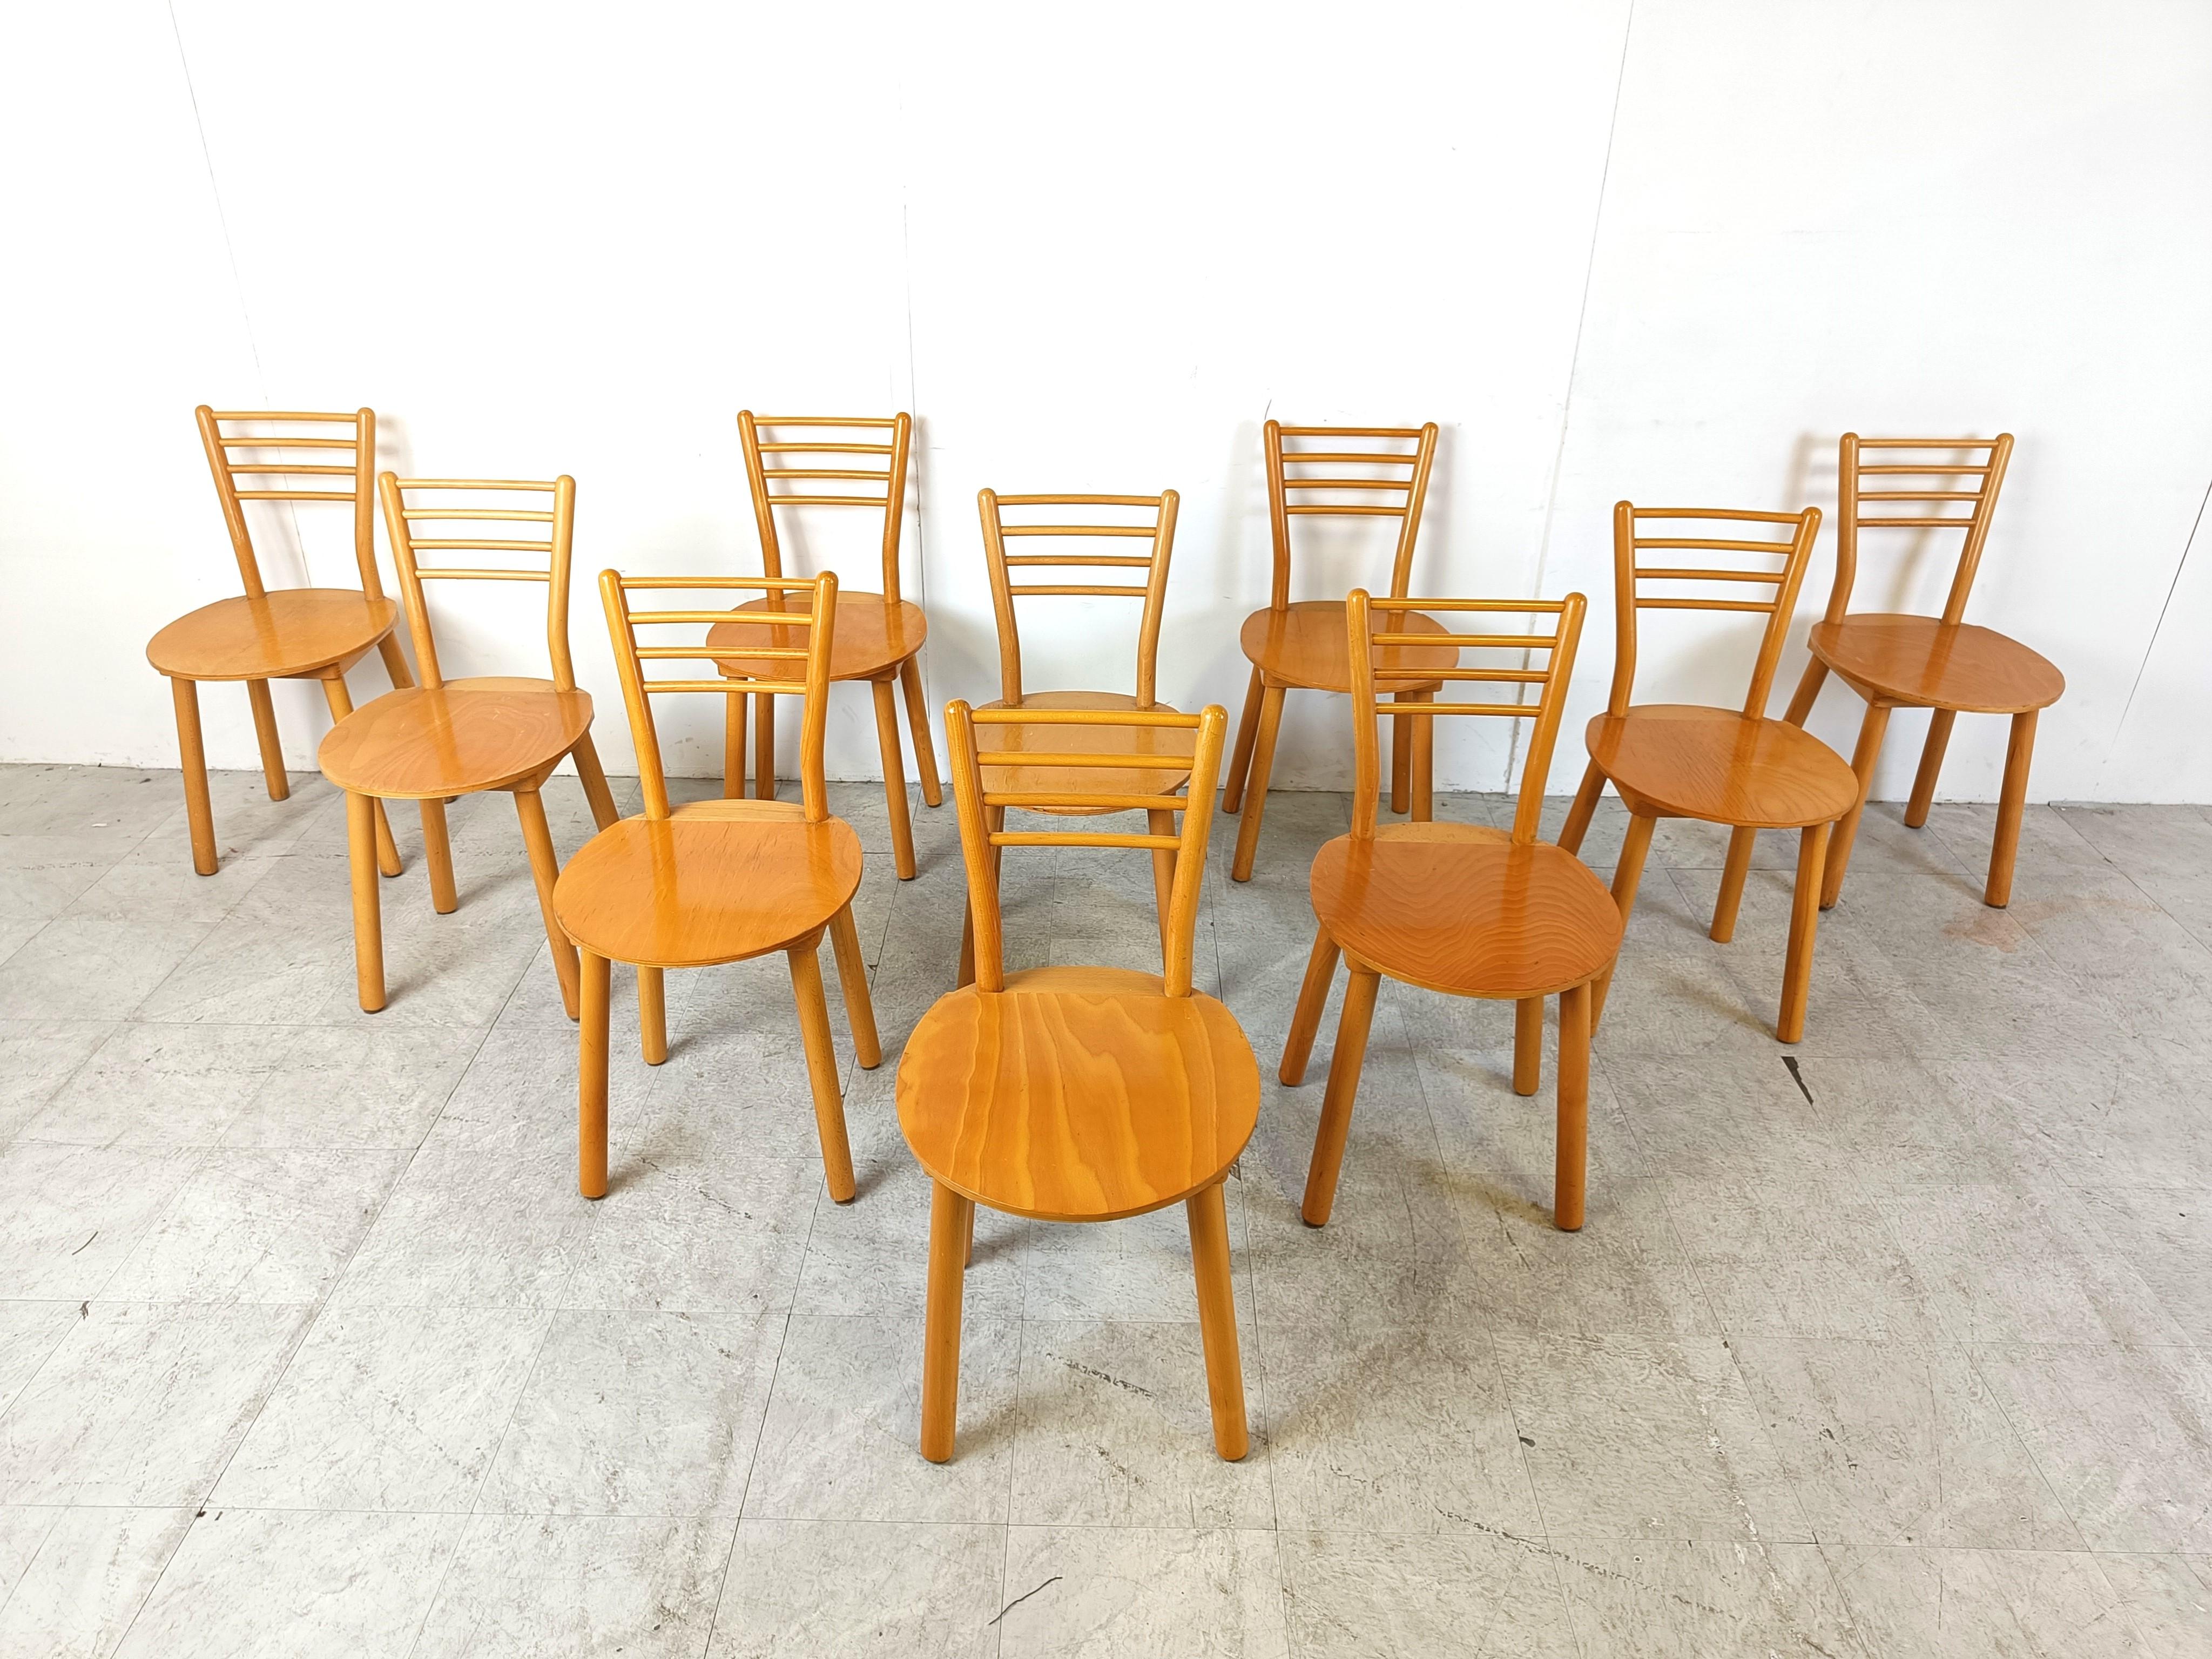 Vintage wooden dining chairs with round seats and ladder backrests.

the backrests are bent, which is a nice design touch.

4 sturdy  chunky legs support the chairs.

Very good condition with normal age related wear.

1970s - Denmark (?)

Height: